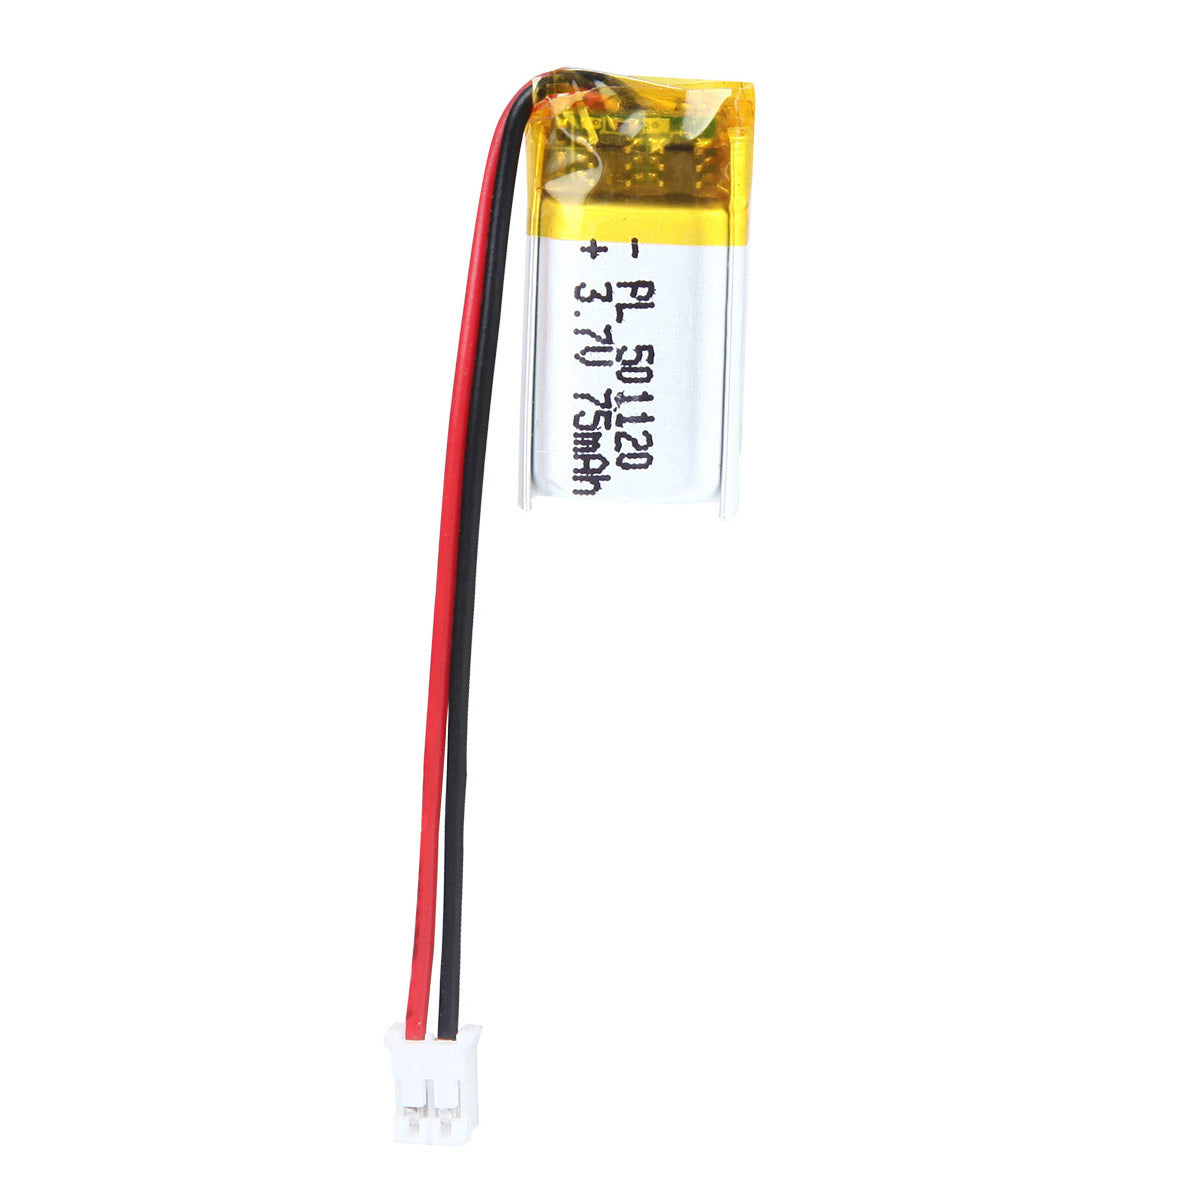 3.7V 75mAh 501120 Rechargeable Lithium Polymer Battery